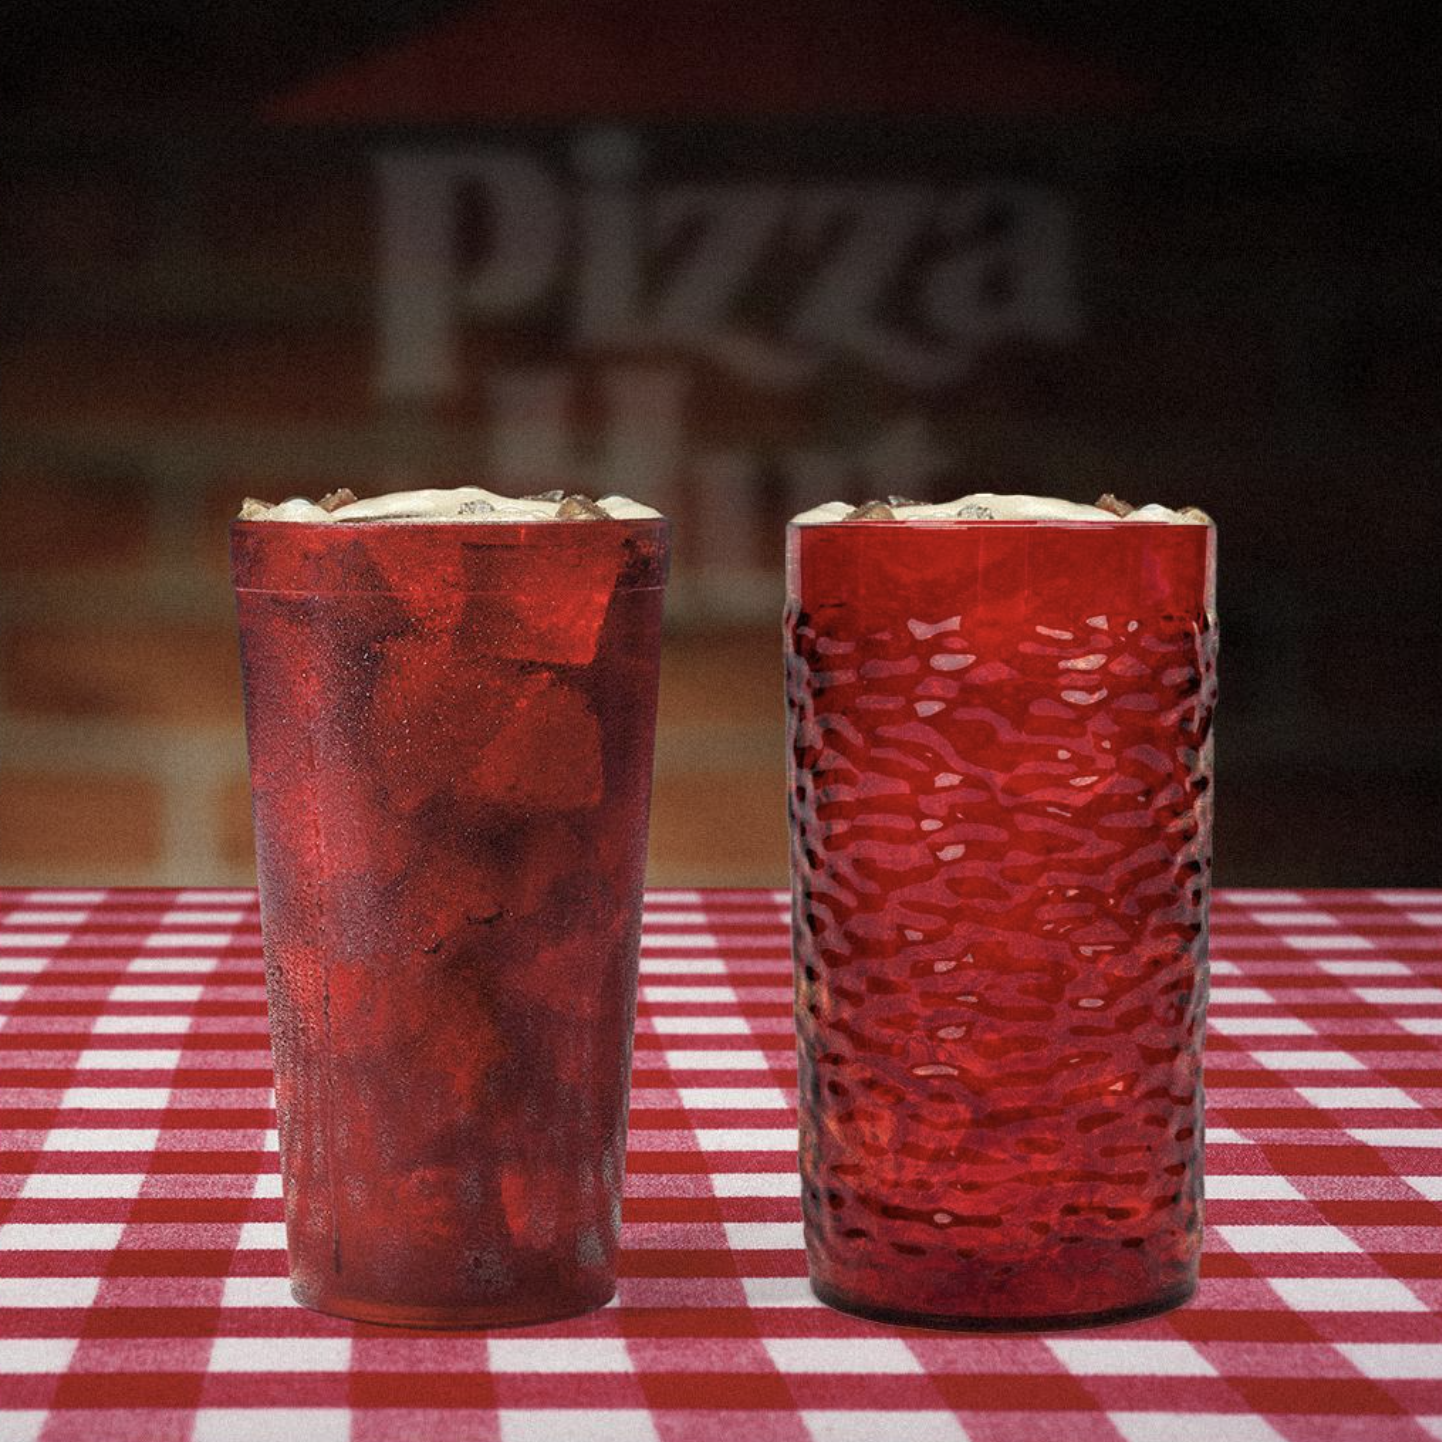 Two different Pizza Hut red plastic cups atop a red-and-white checkered tablecloth